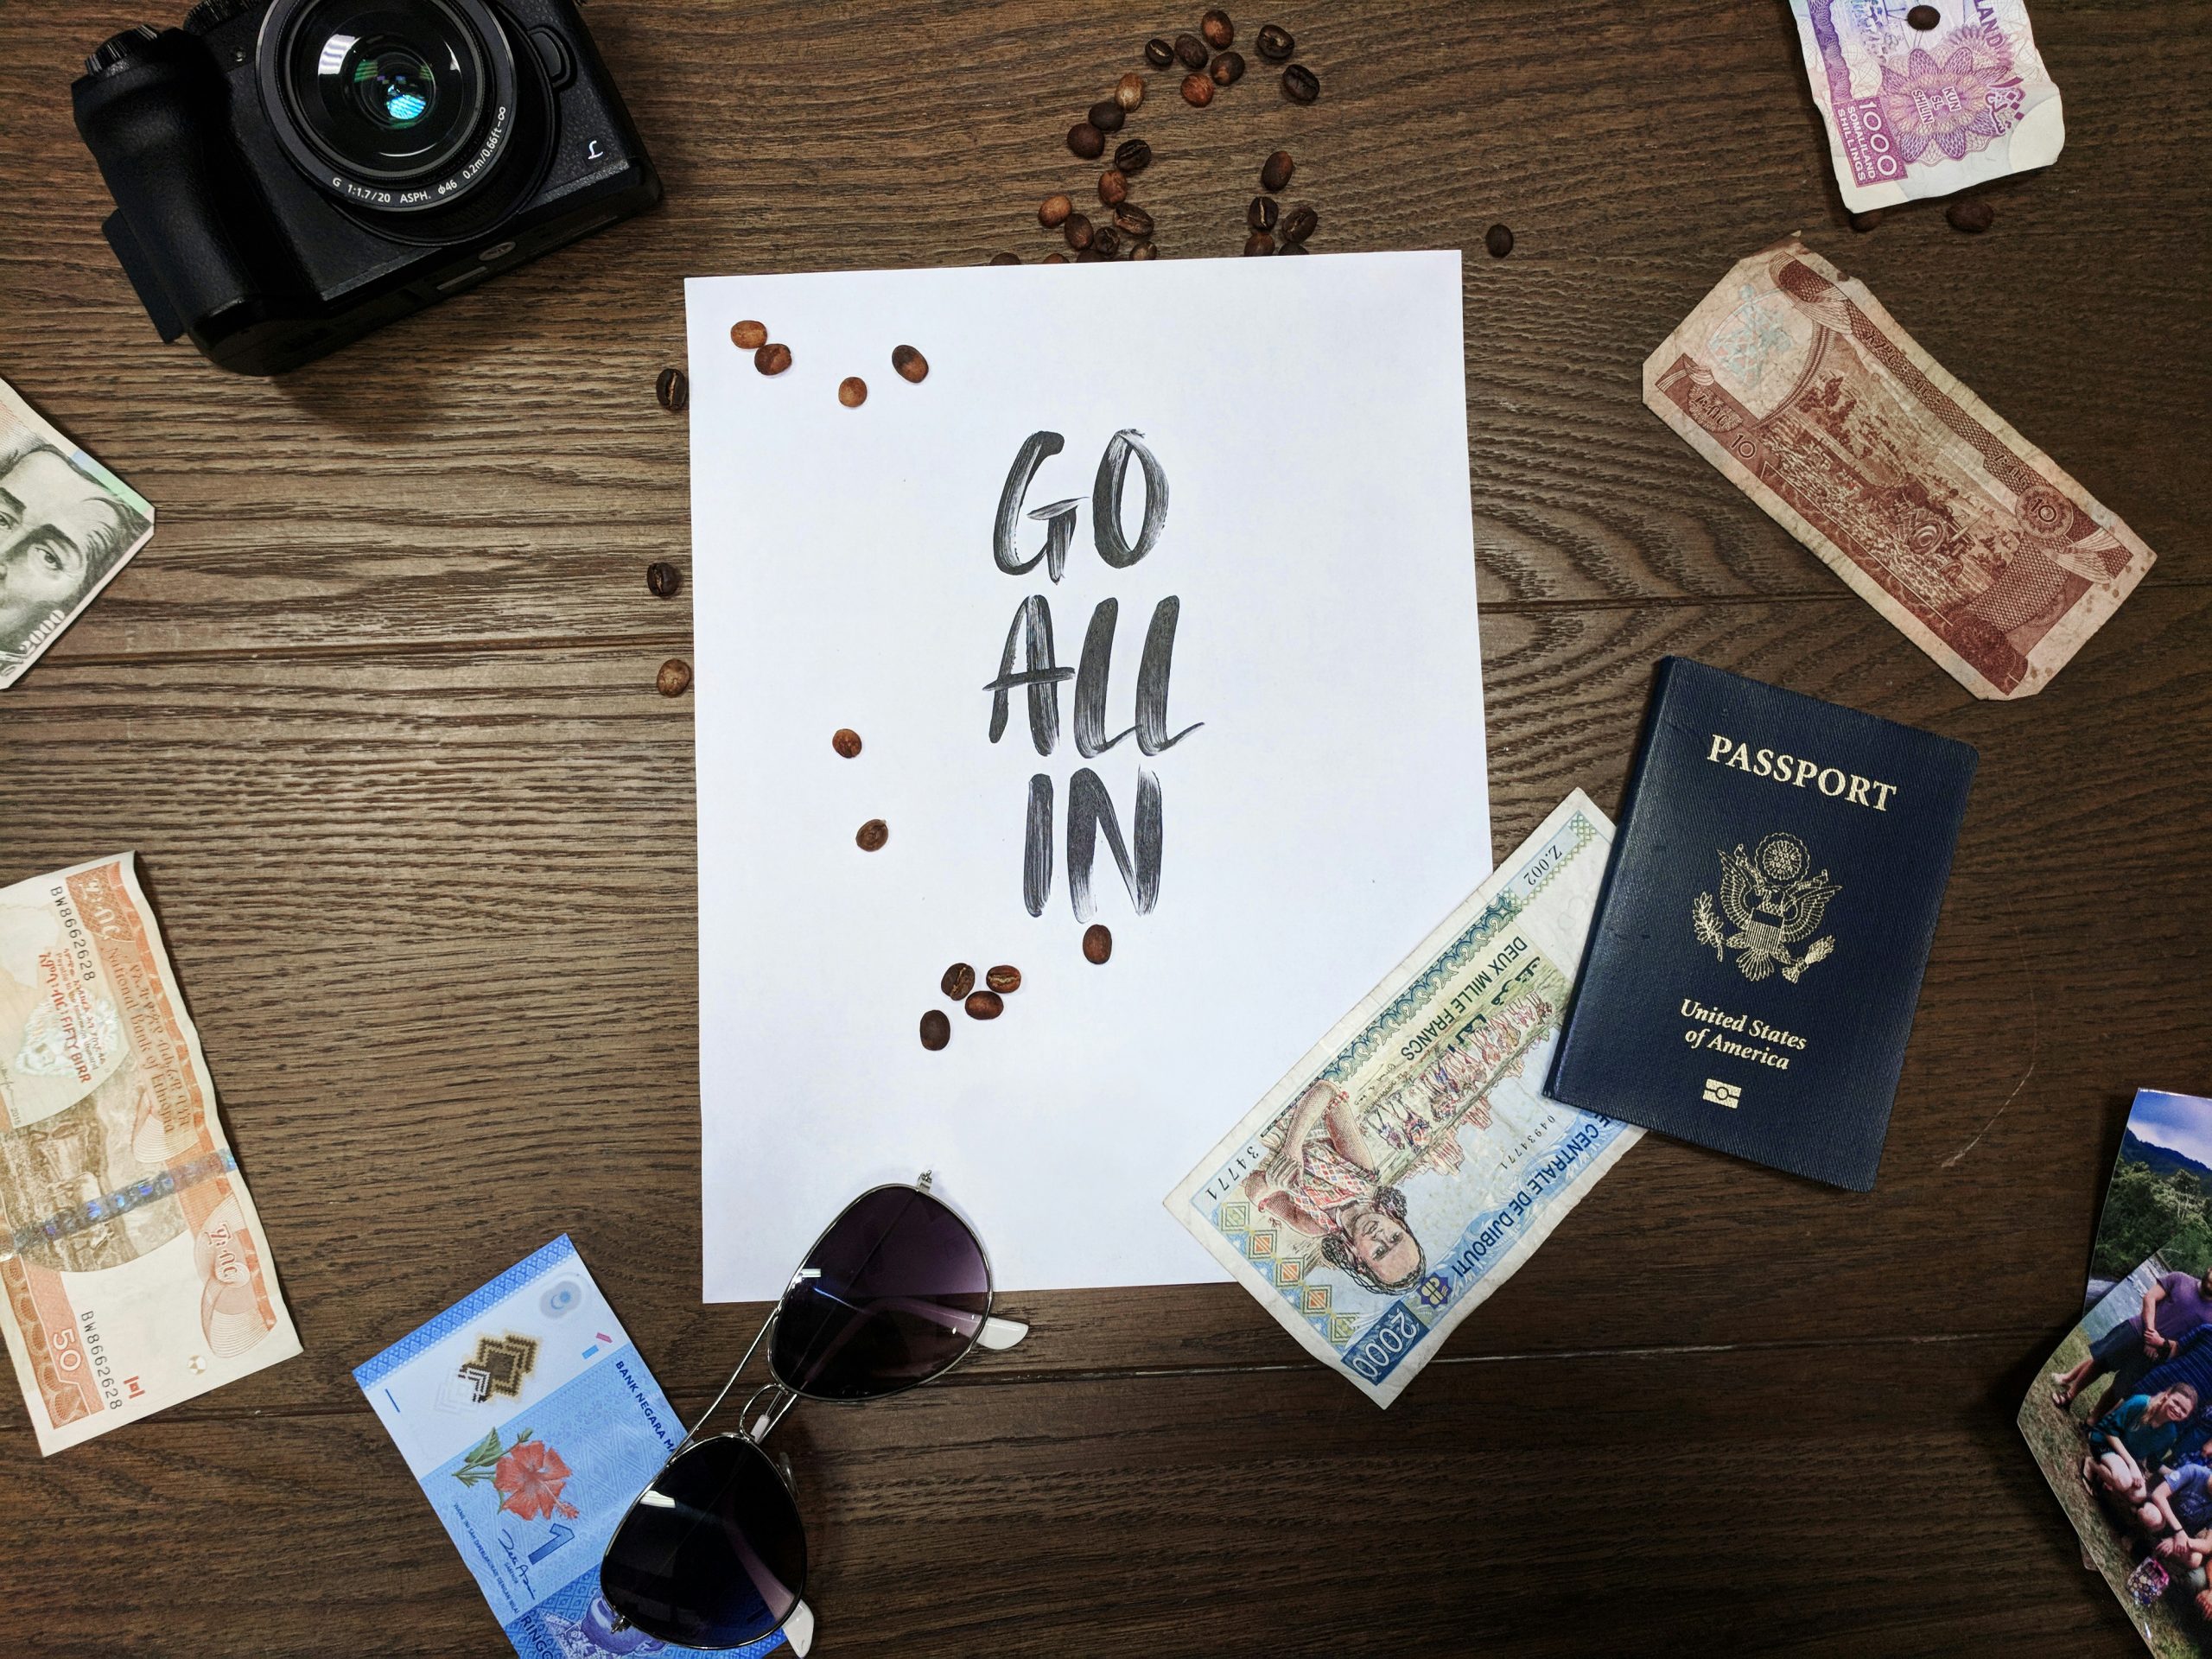 get ready to satisfy your wanderlust with our travel inspiration and tips. discover new destinations and plan your next adventure with us.